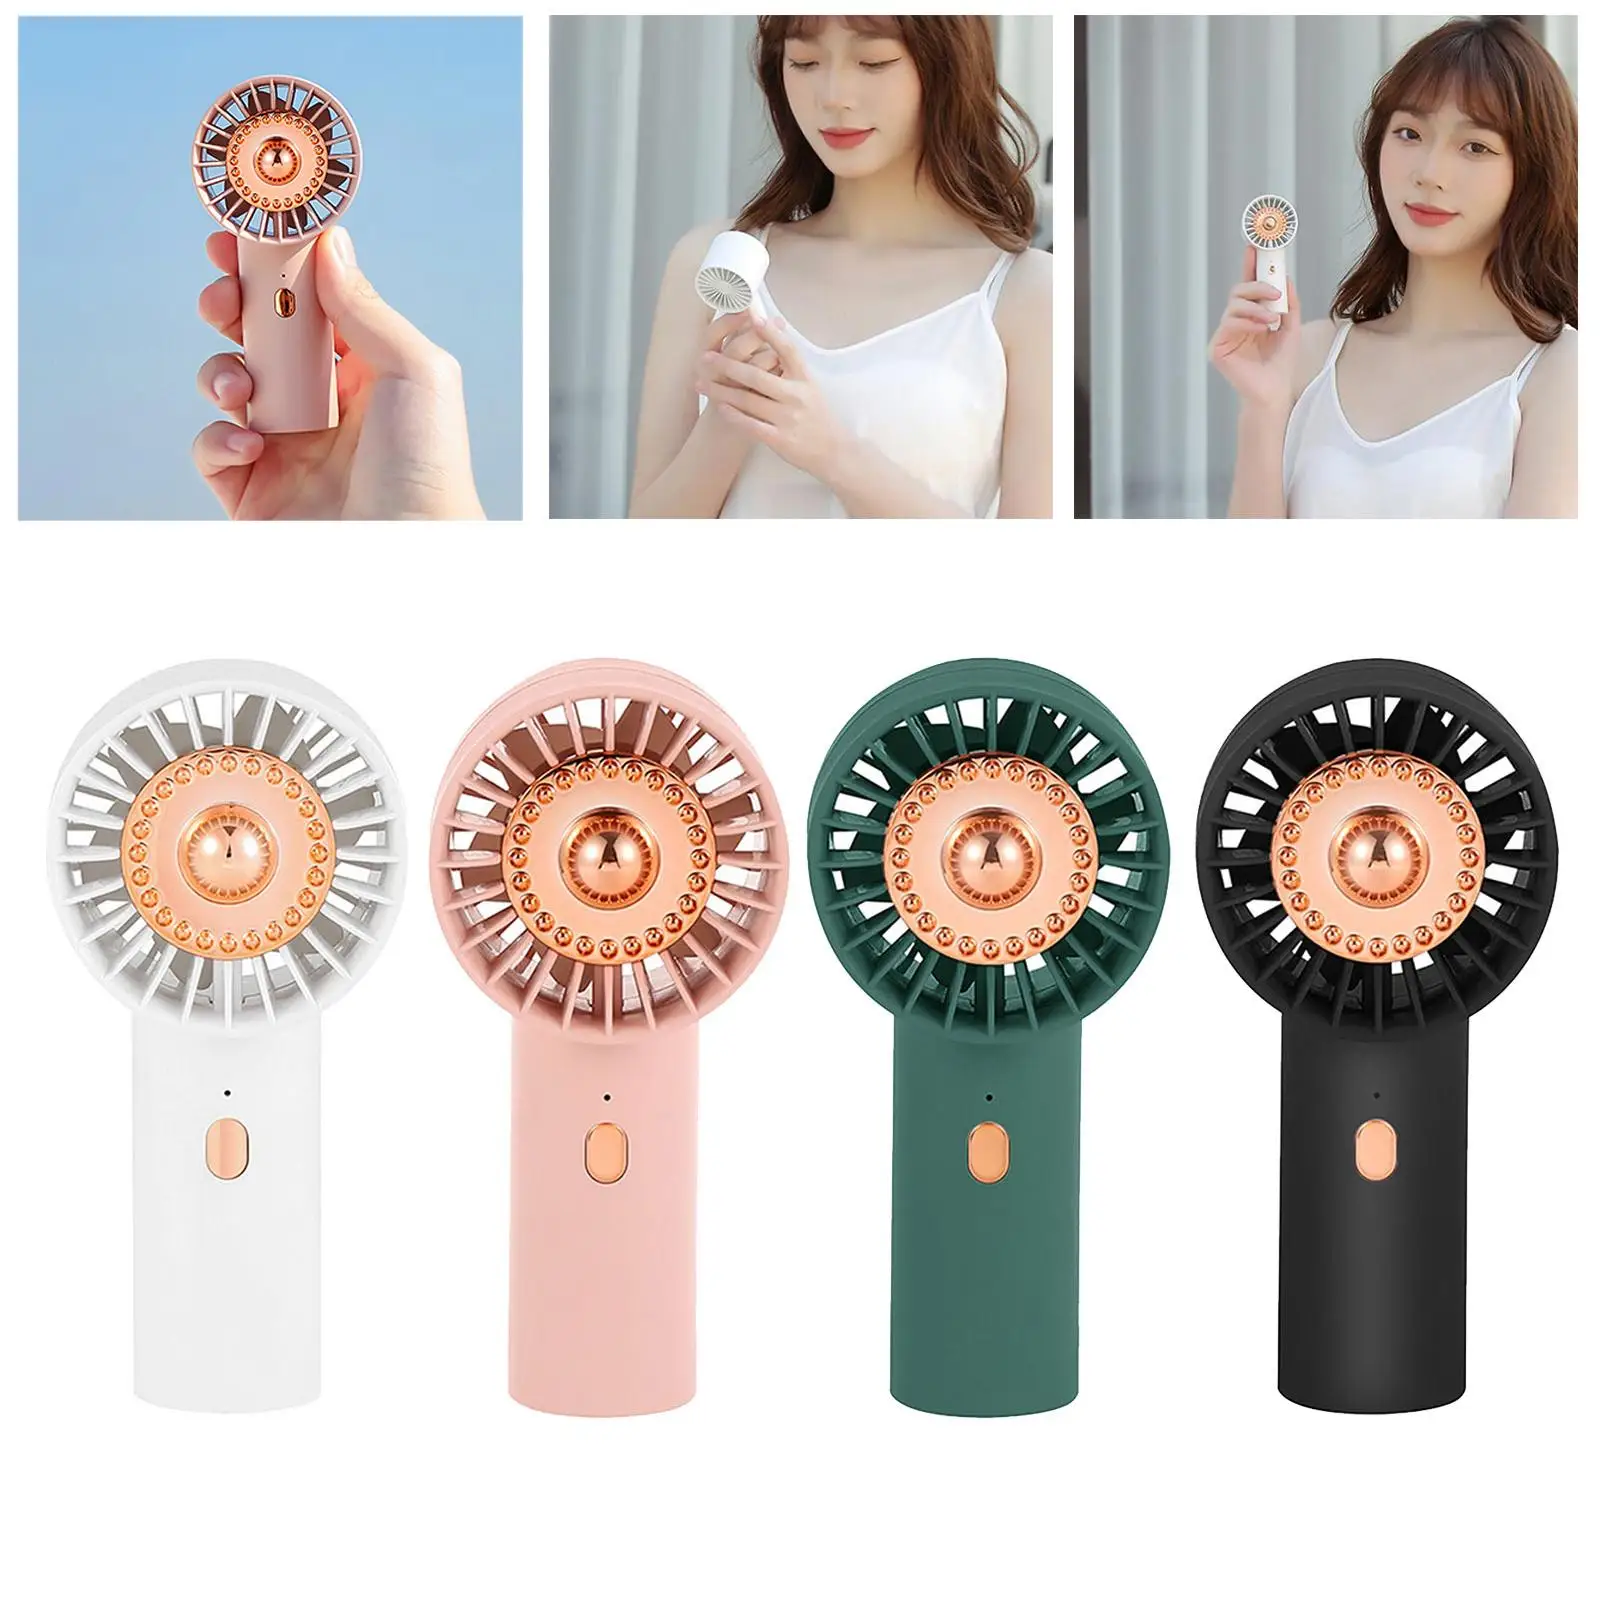 Mini Handheld Fan USB 3 Speeds Portable Personal Cooling Fan for Table Office Travel Dorm Camping